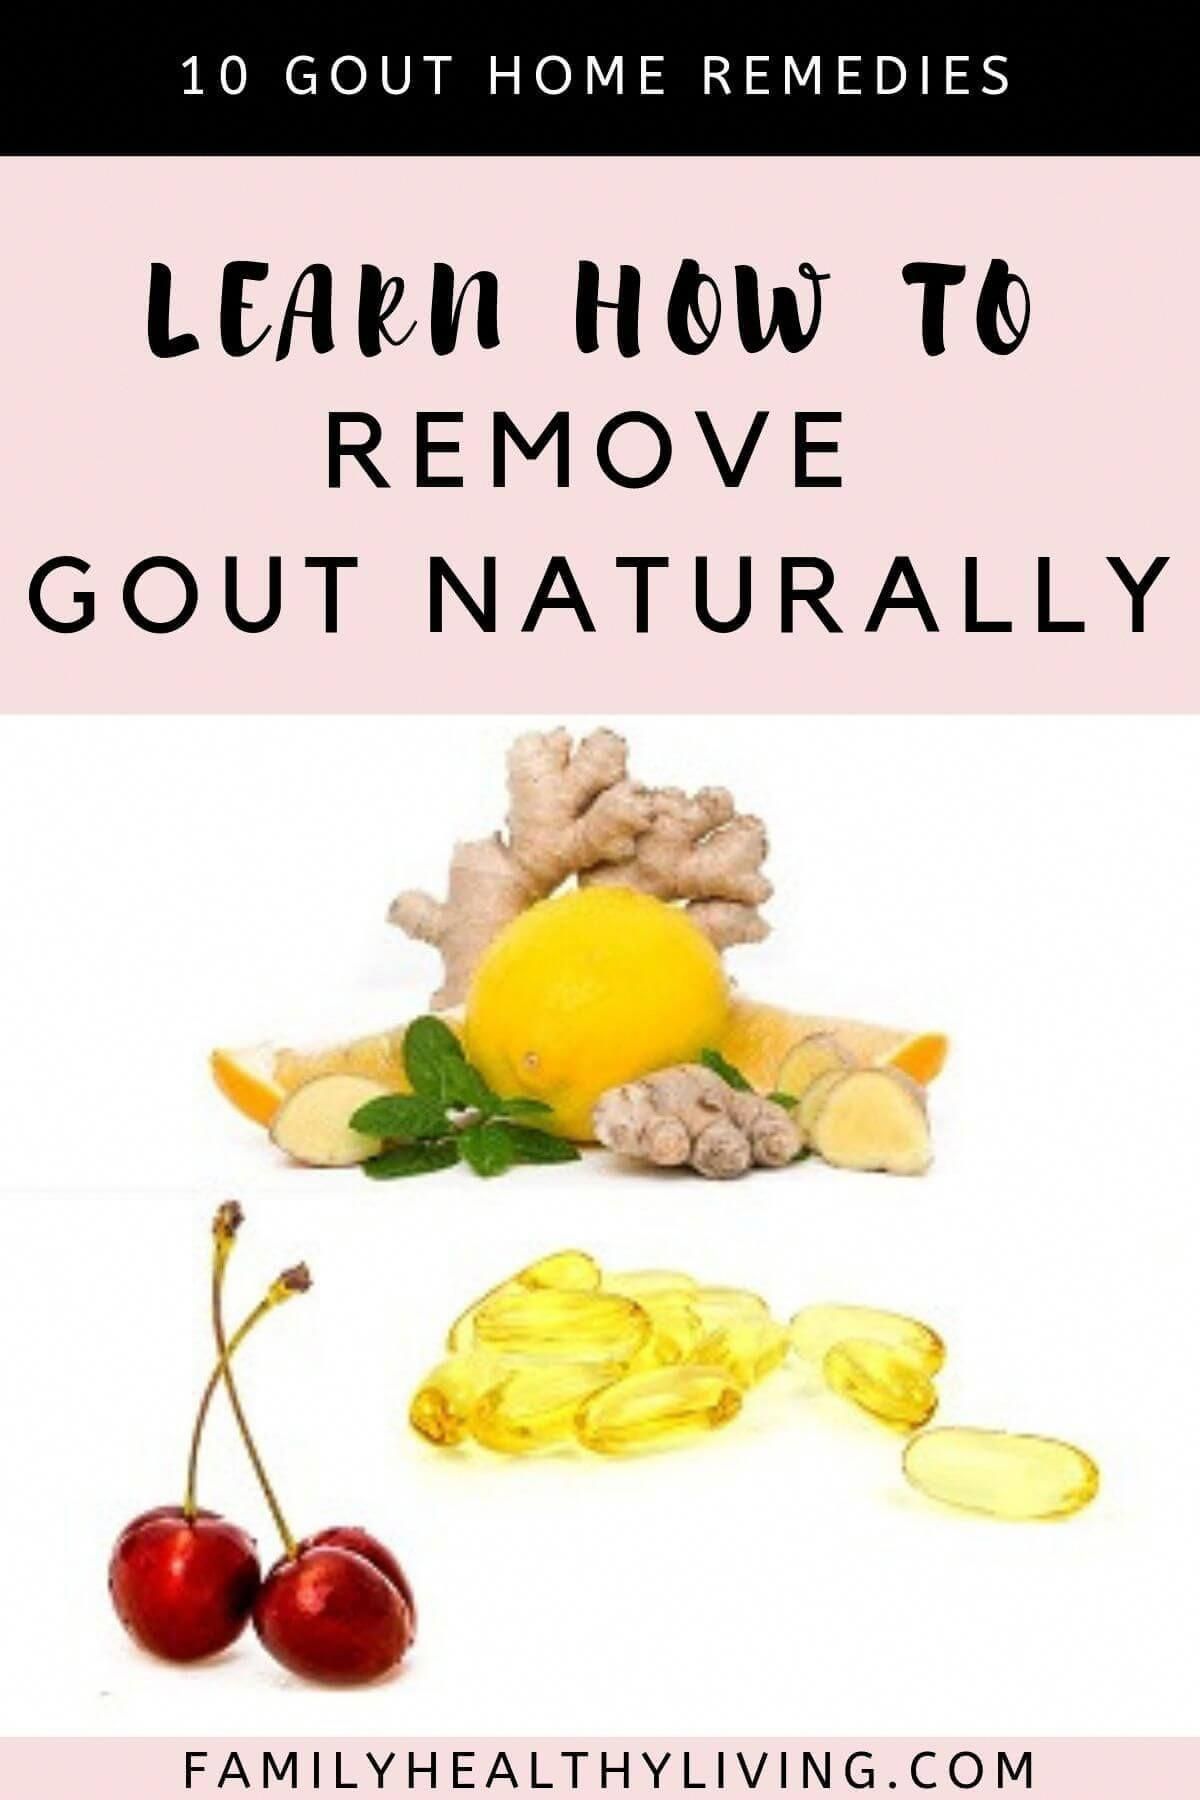 10 Gout Home Remedies